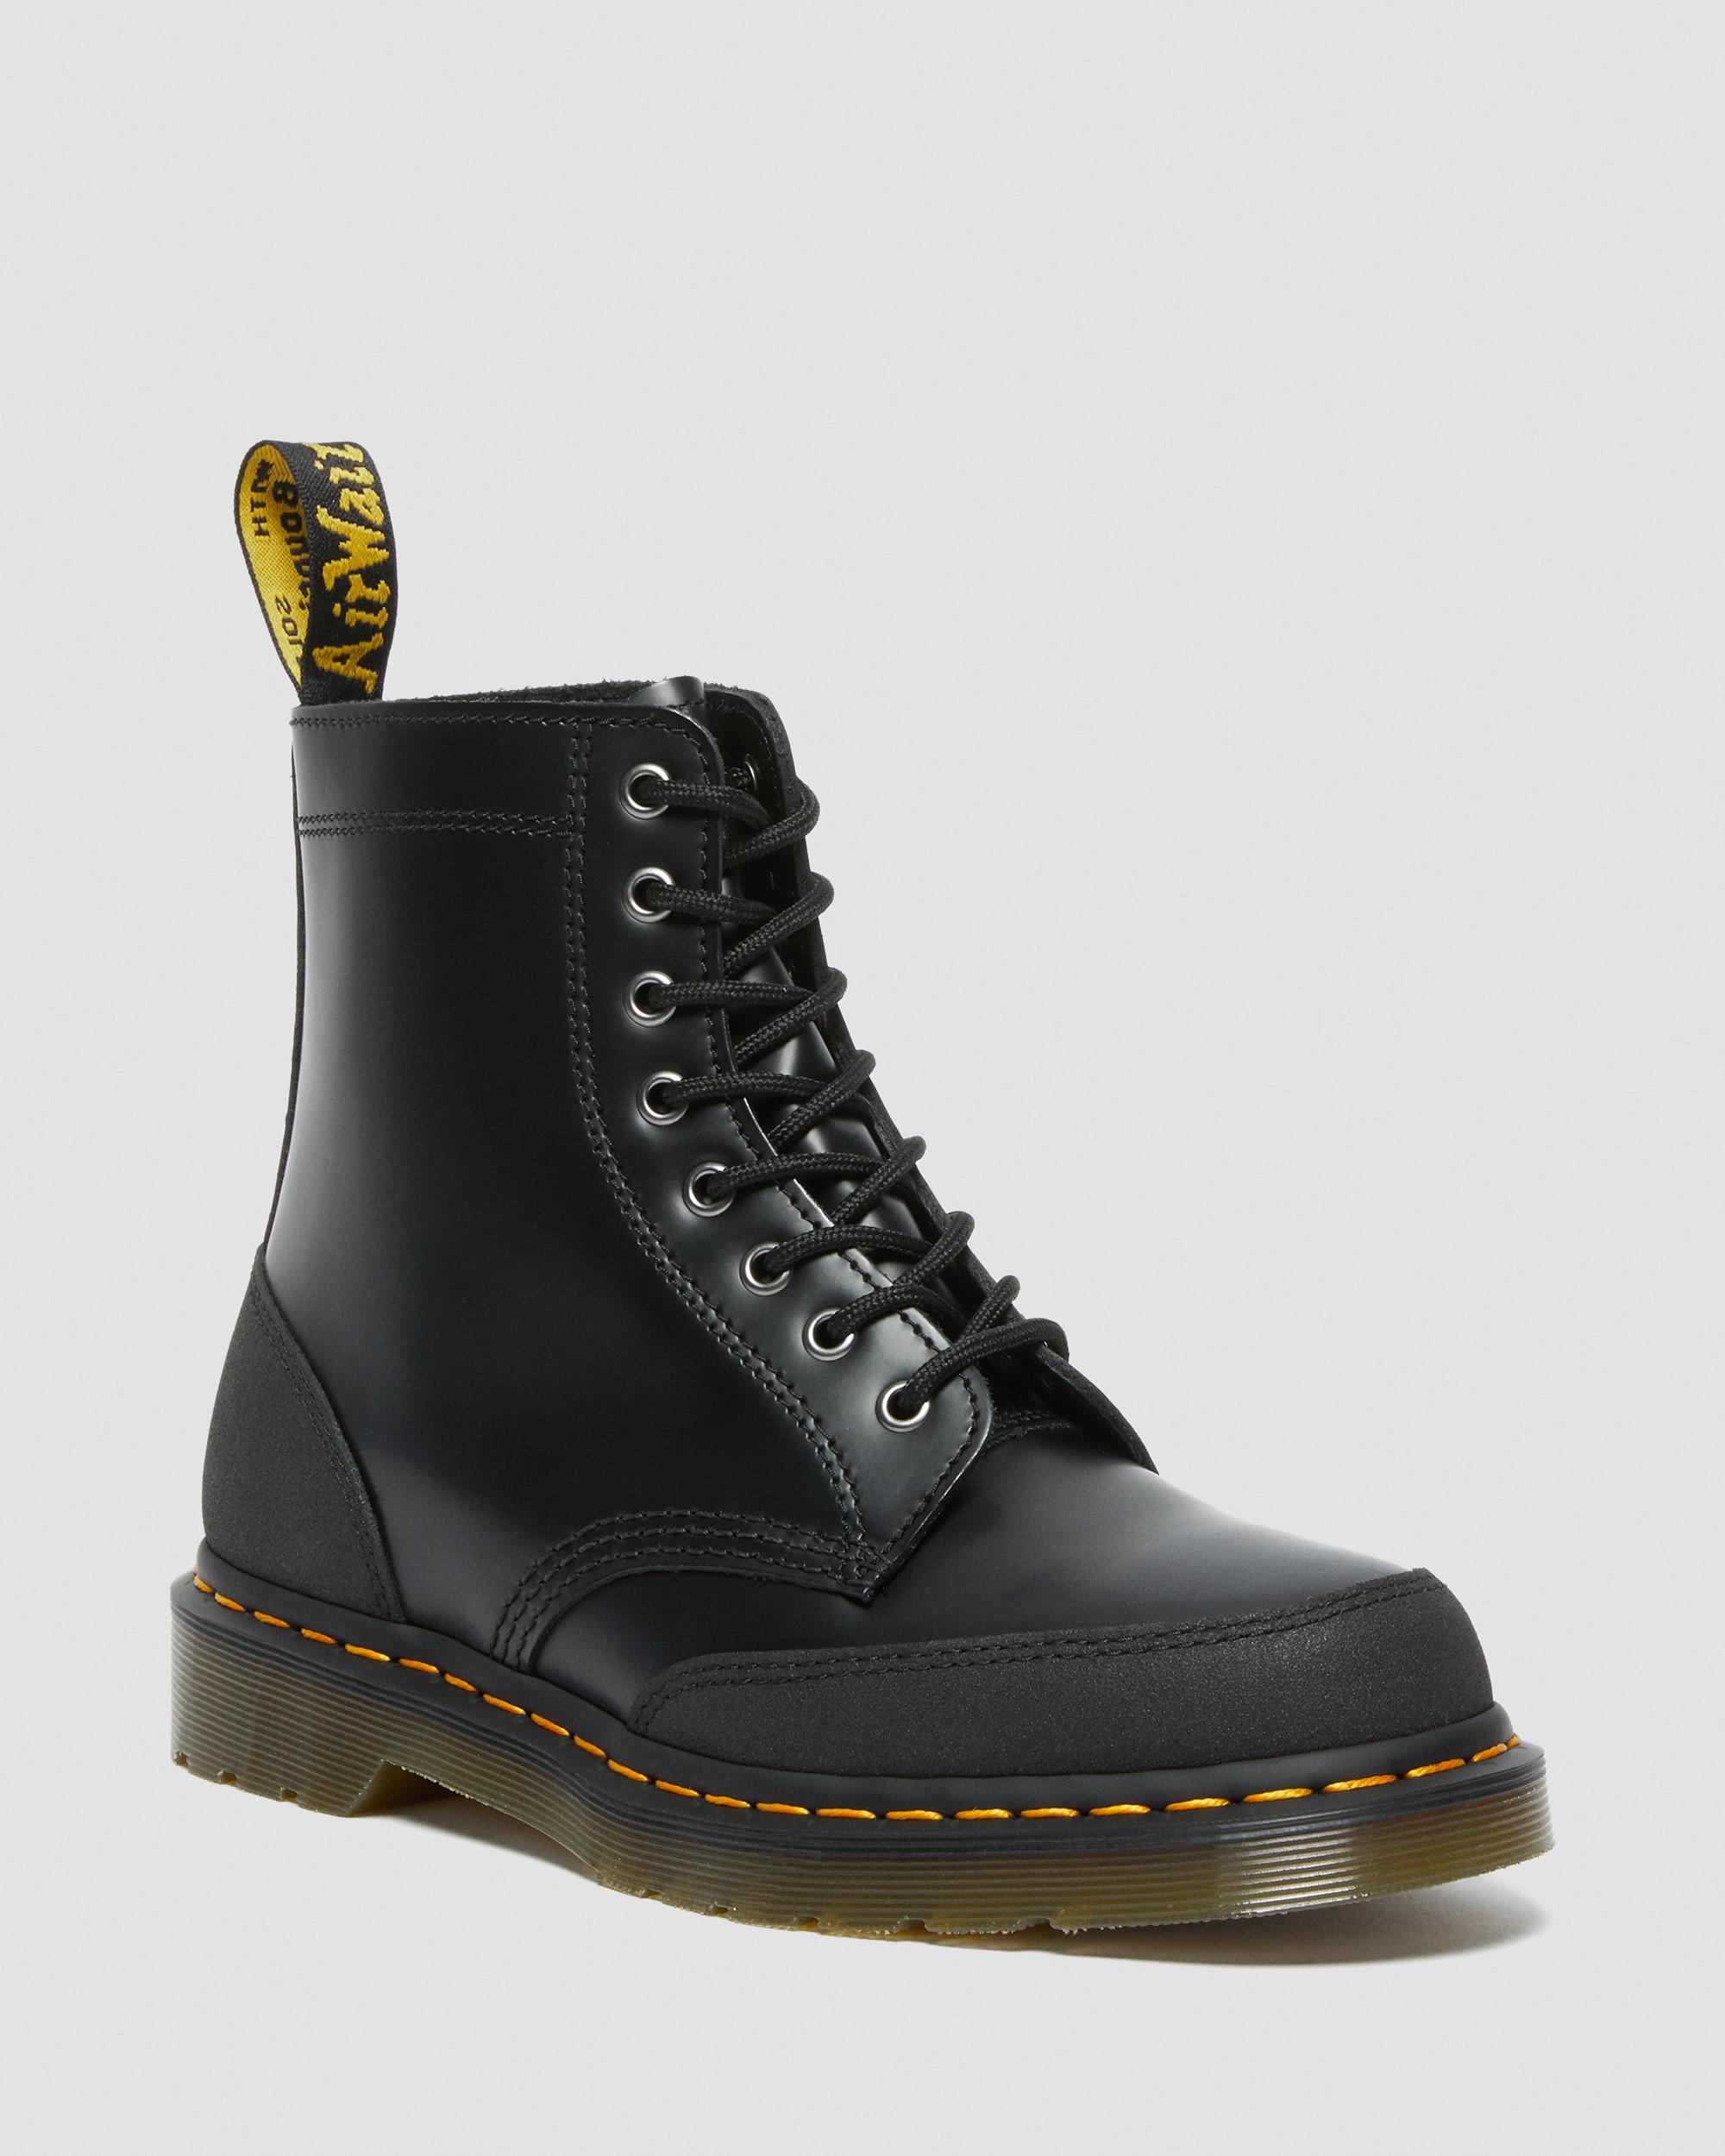 1460 Guard Panel Leather Lace Up Boots, Black | Dr. Martens